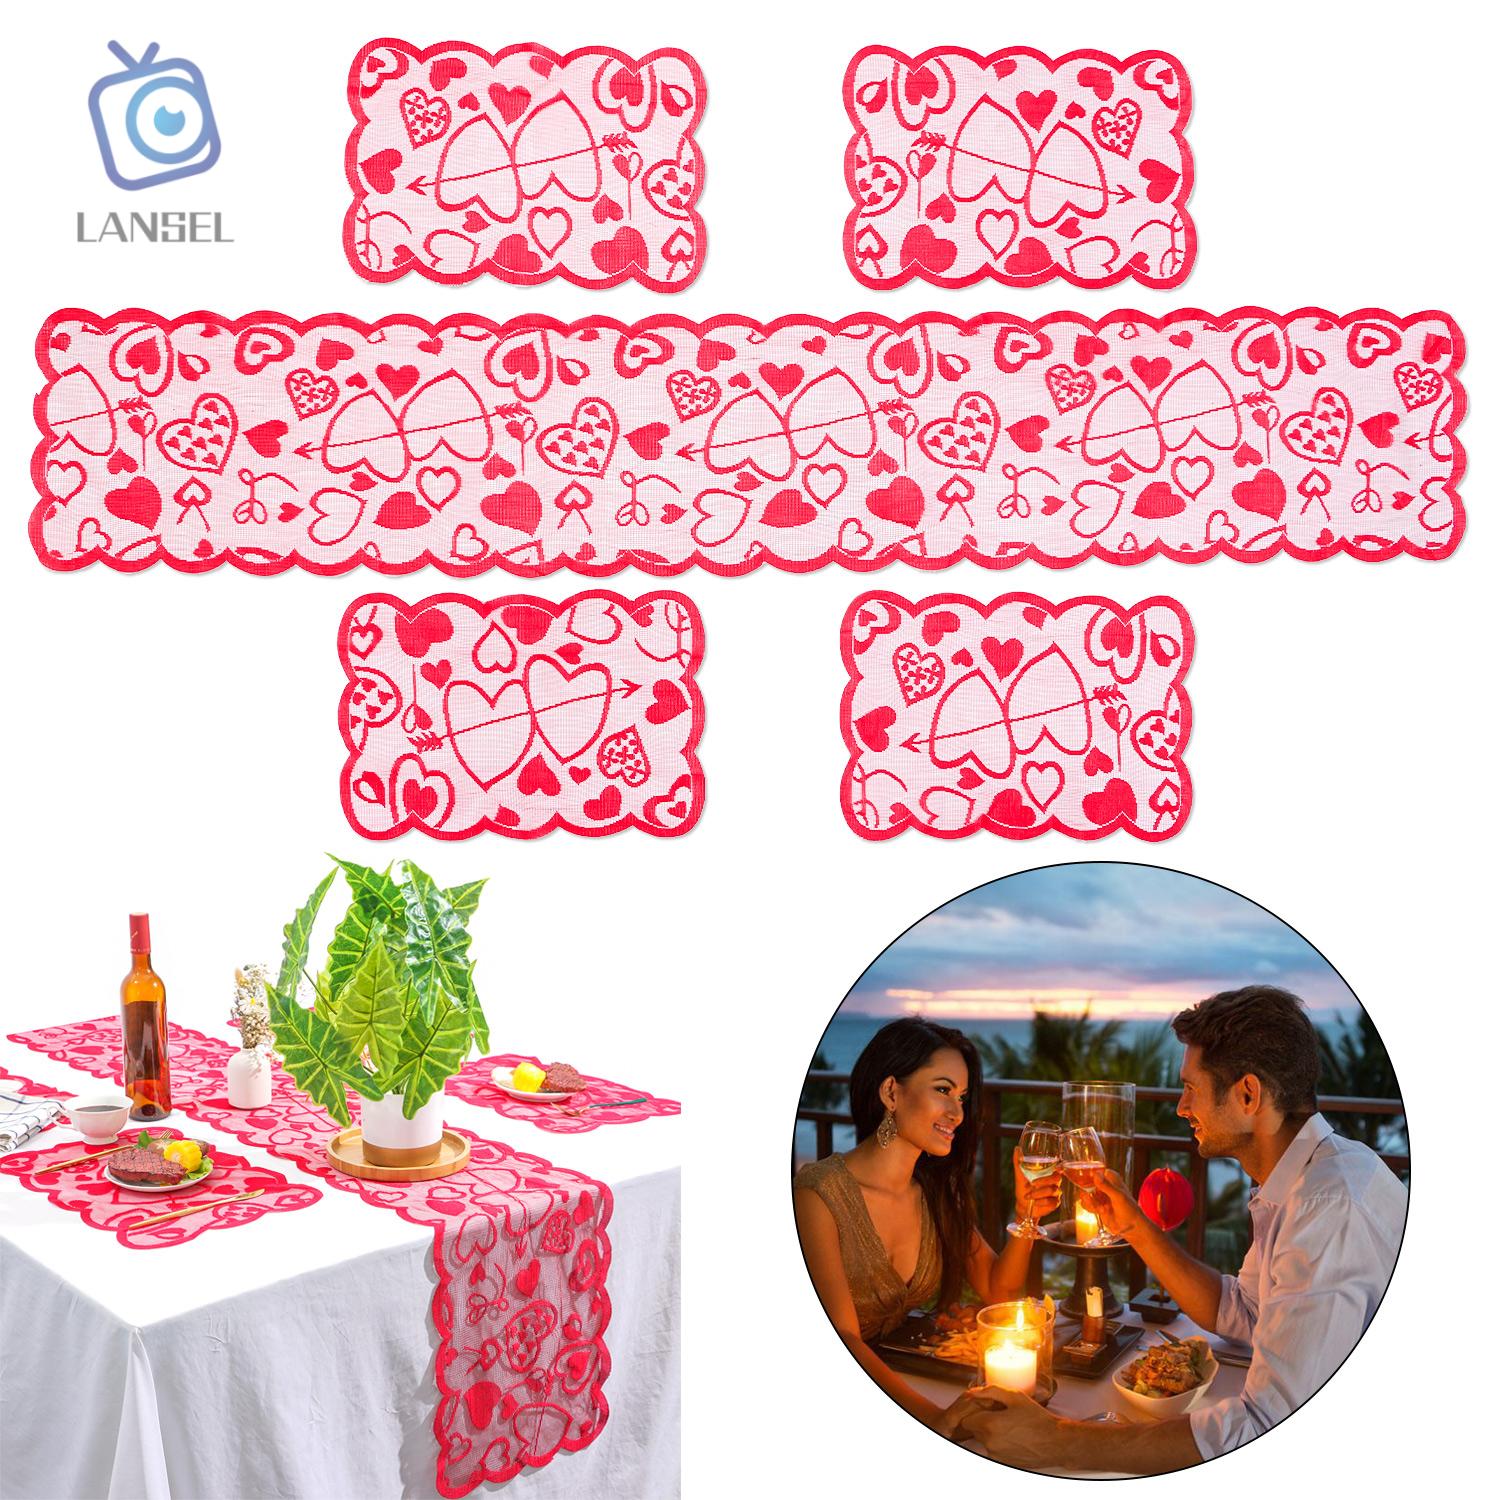 ❤LANSEL❤ 5PCS Rectangular Tablecloth Table Placemats Dinner Supplies Lace Table Runner Heart Party Wedding Anniversary Home Romantic Valentines Day